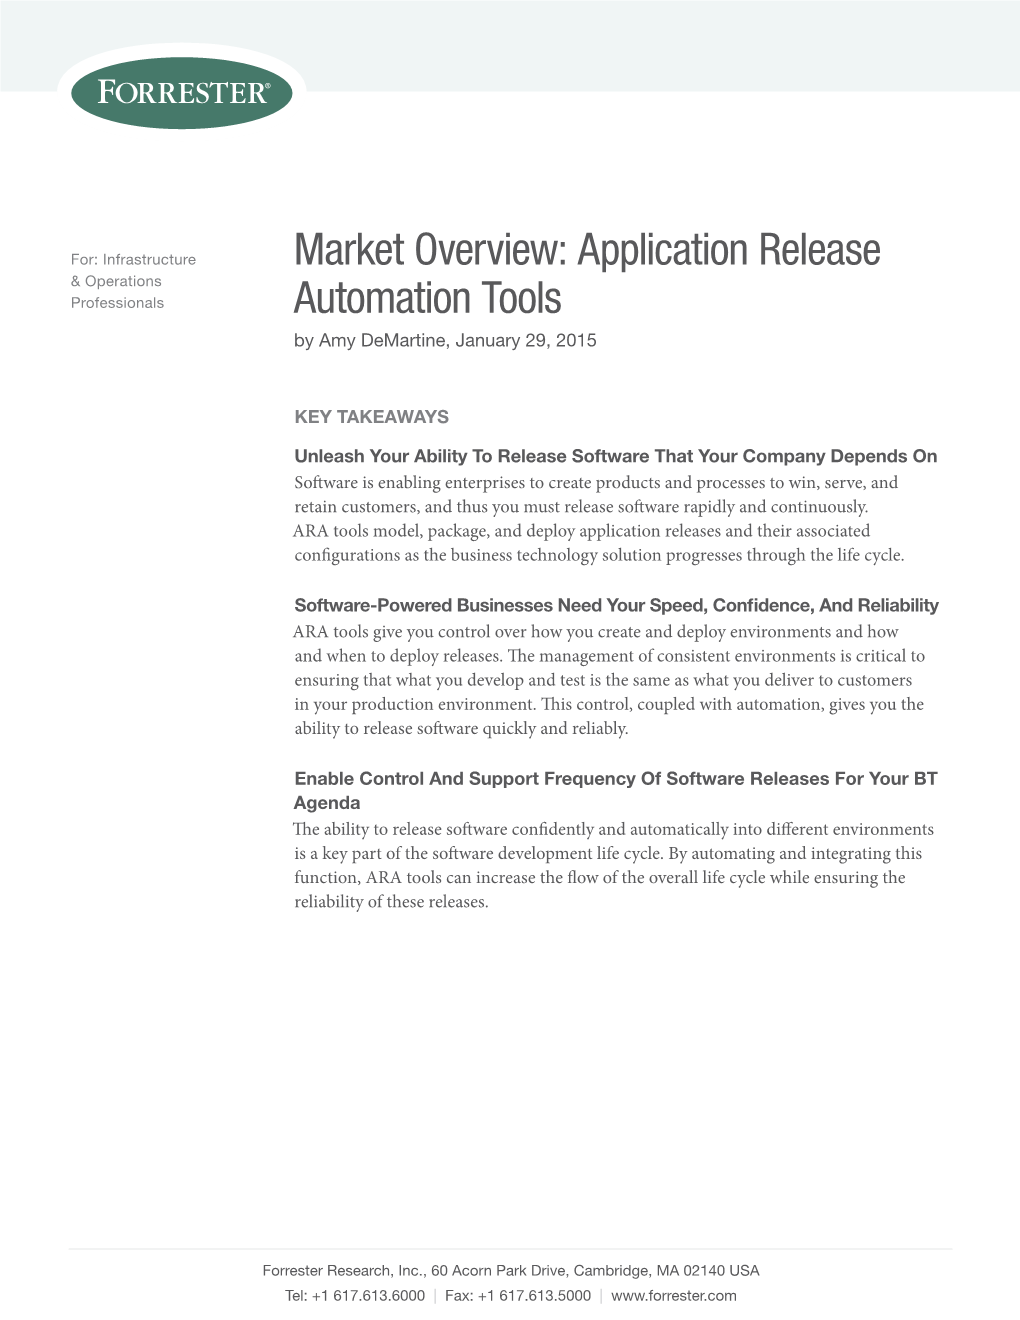 Application Release Automation Tools